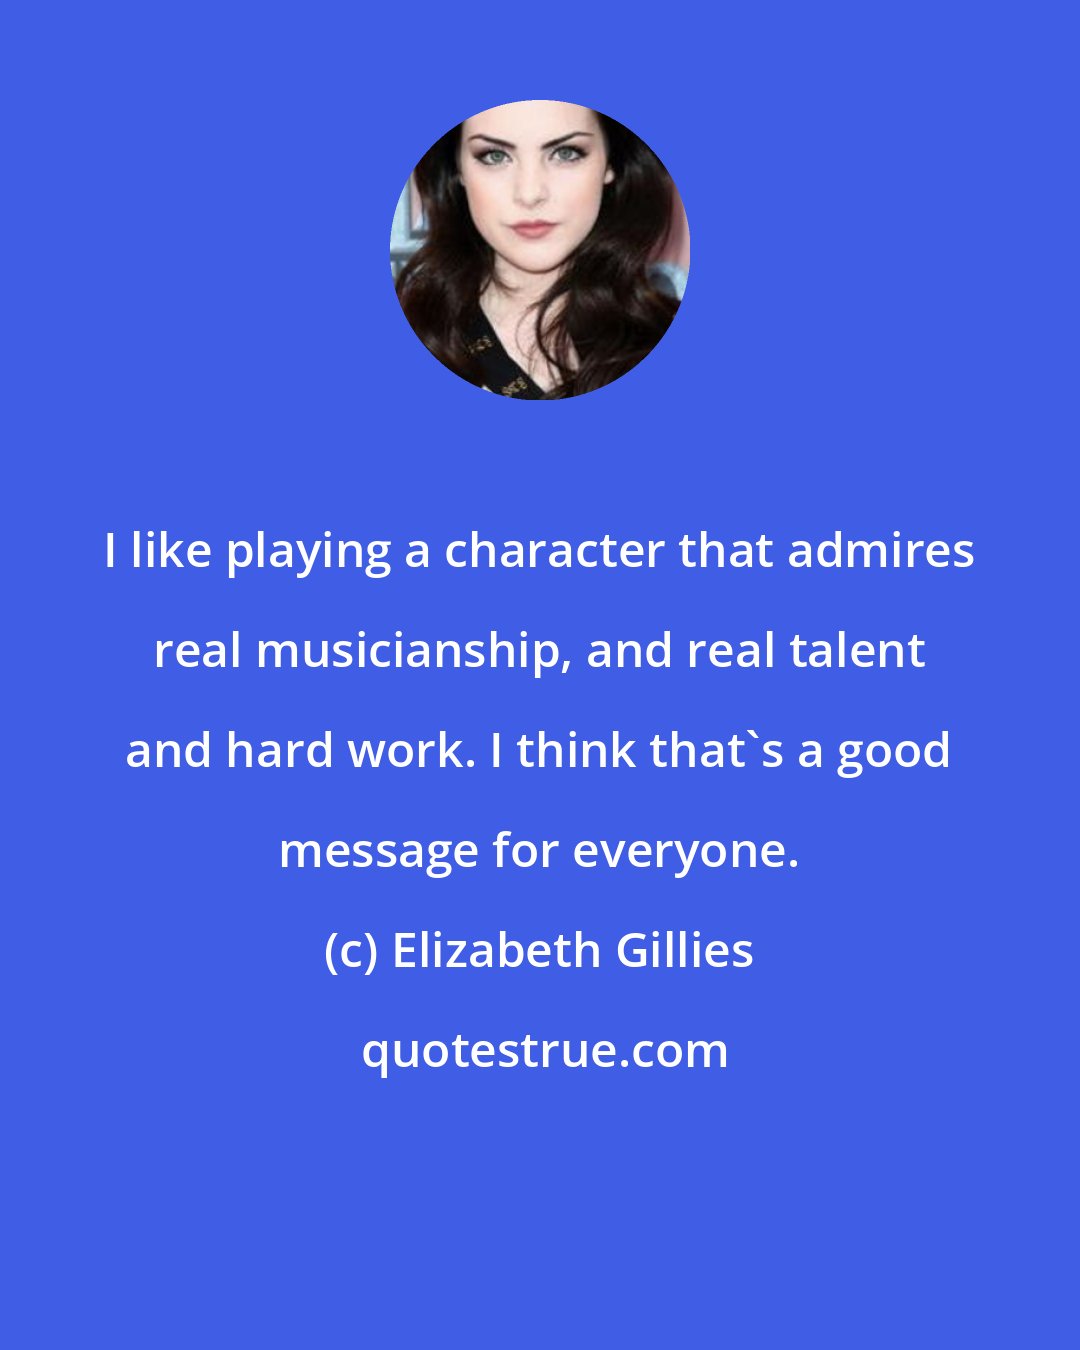 Elizabeth Gillies: I like playing a character that admires real musicianship, and real talent and hard work. I think that's a good message for everyone.